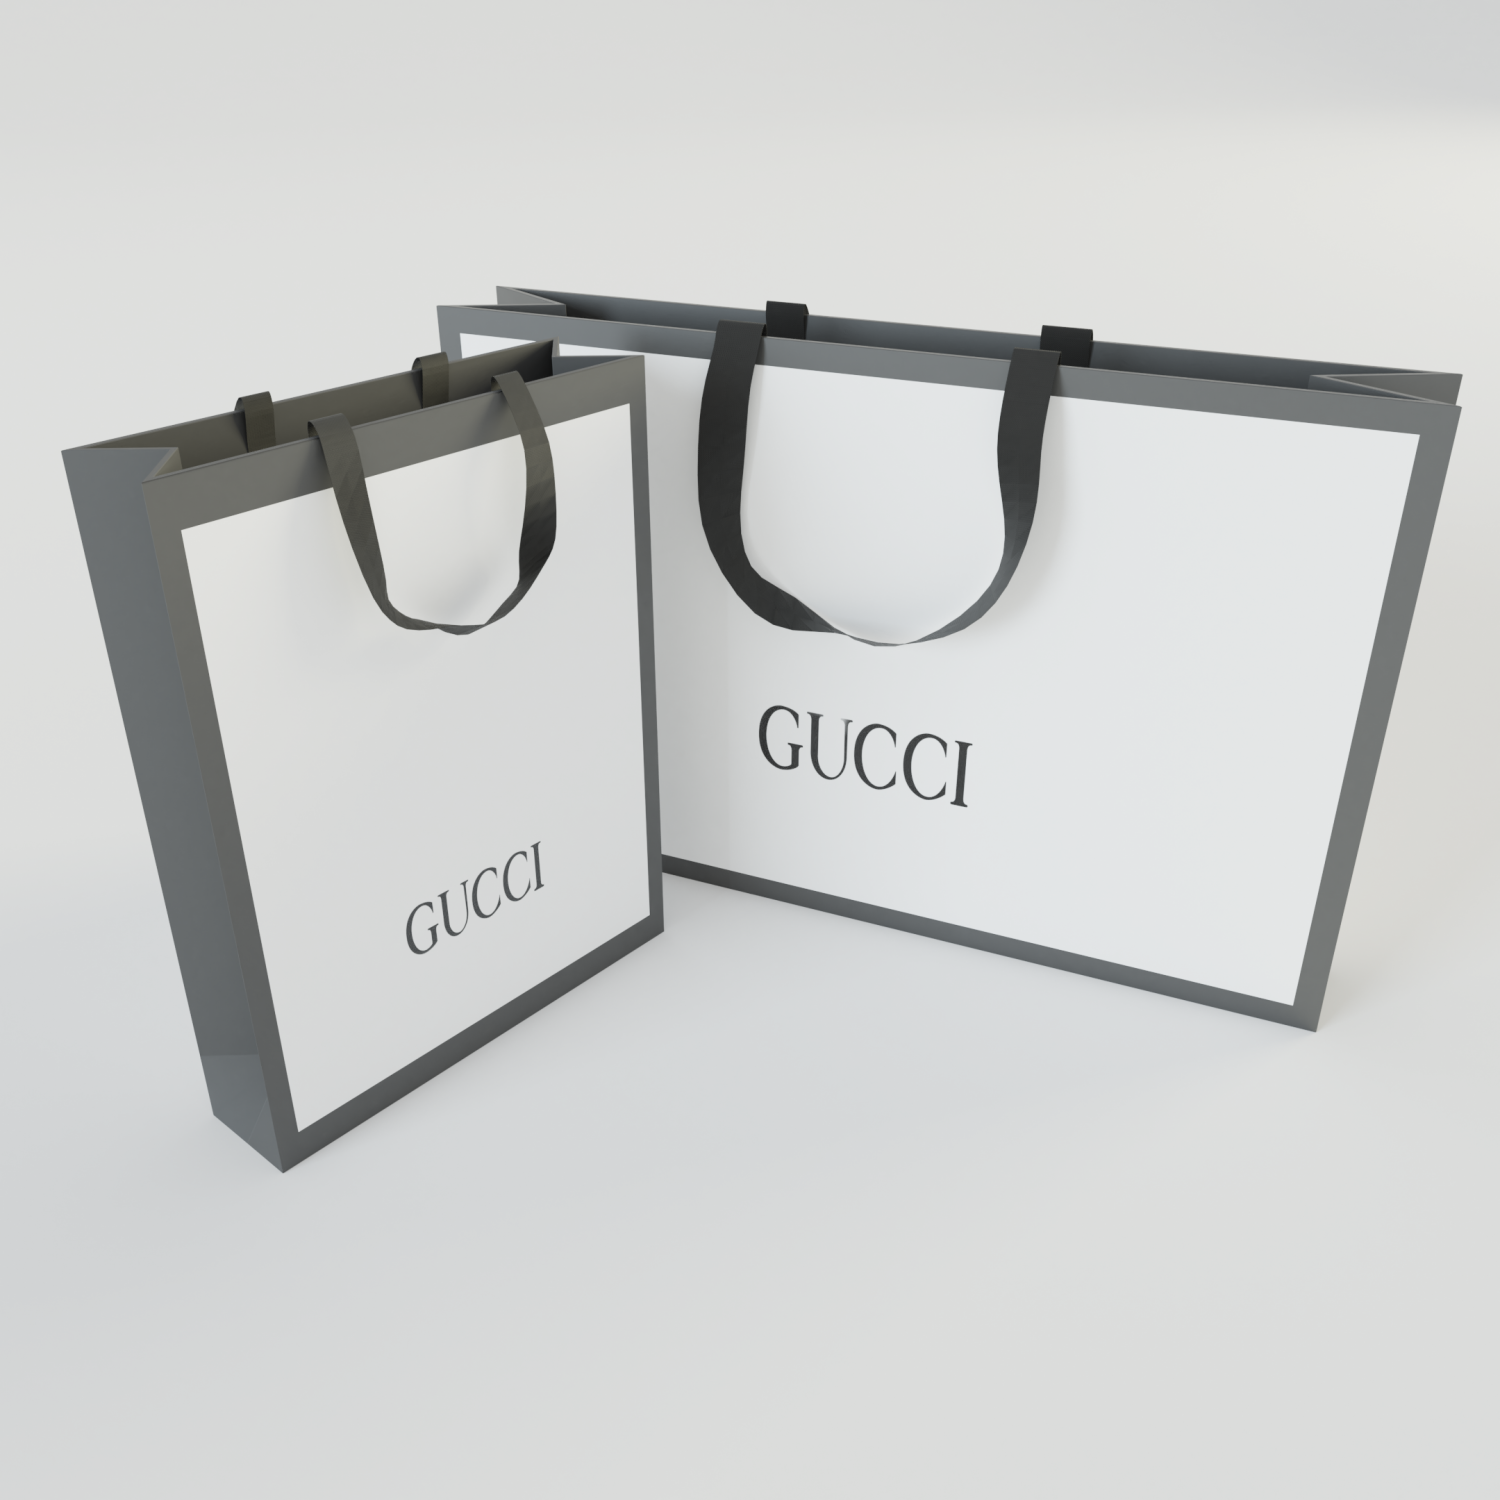 gucci shopping bag Low-poly 3D Model